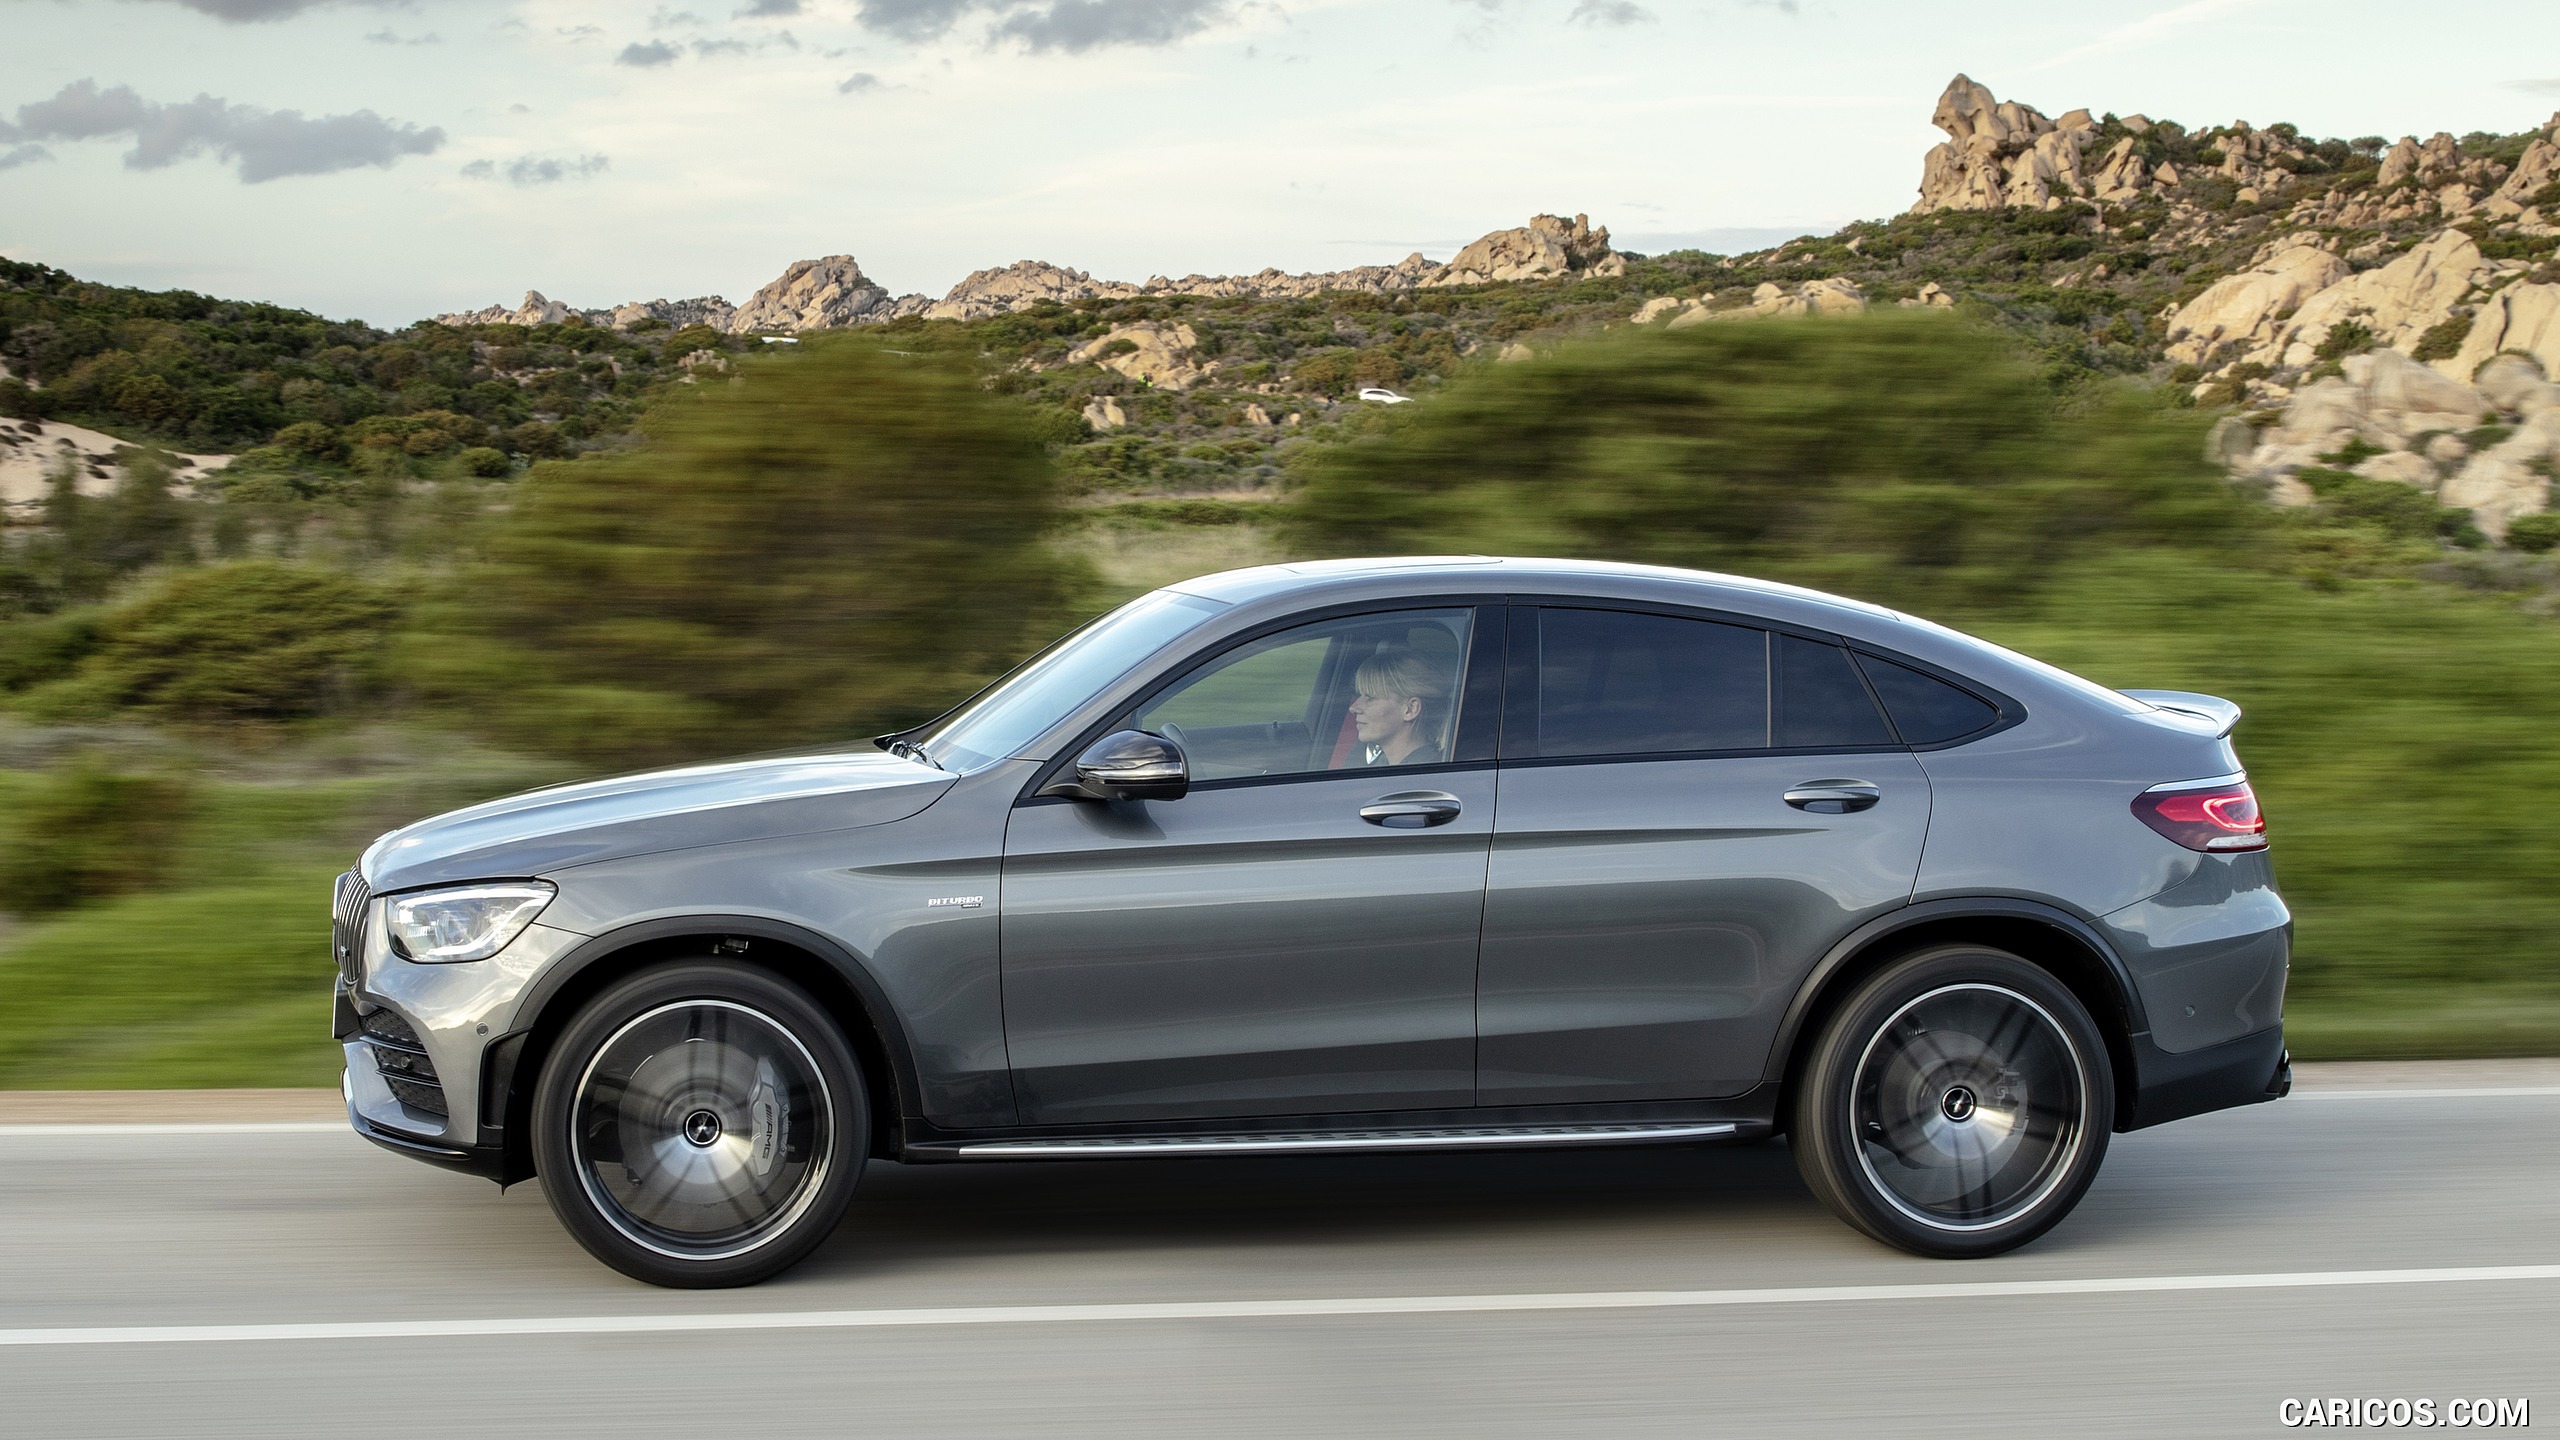 2020 Mercedes-AMG GLC 43 4MATIC Coupe - Side, #11 of 173